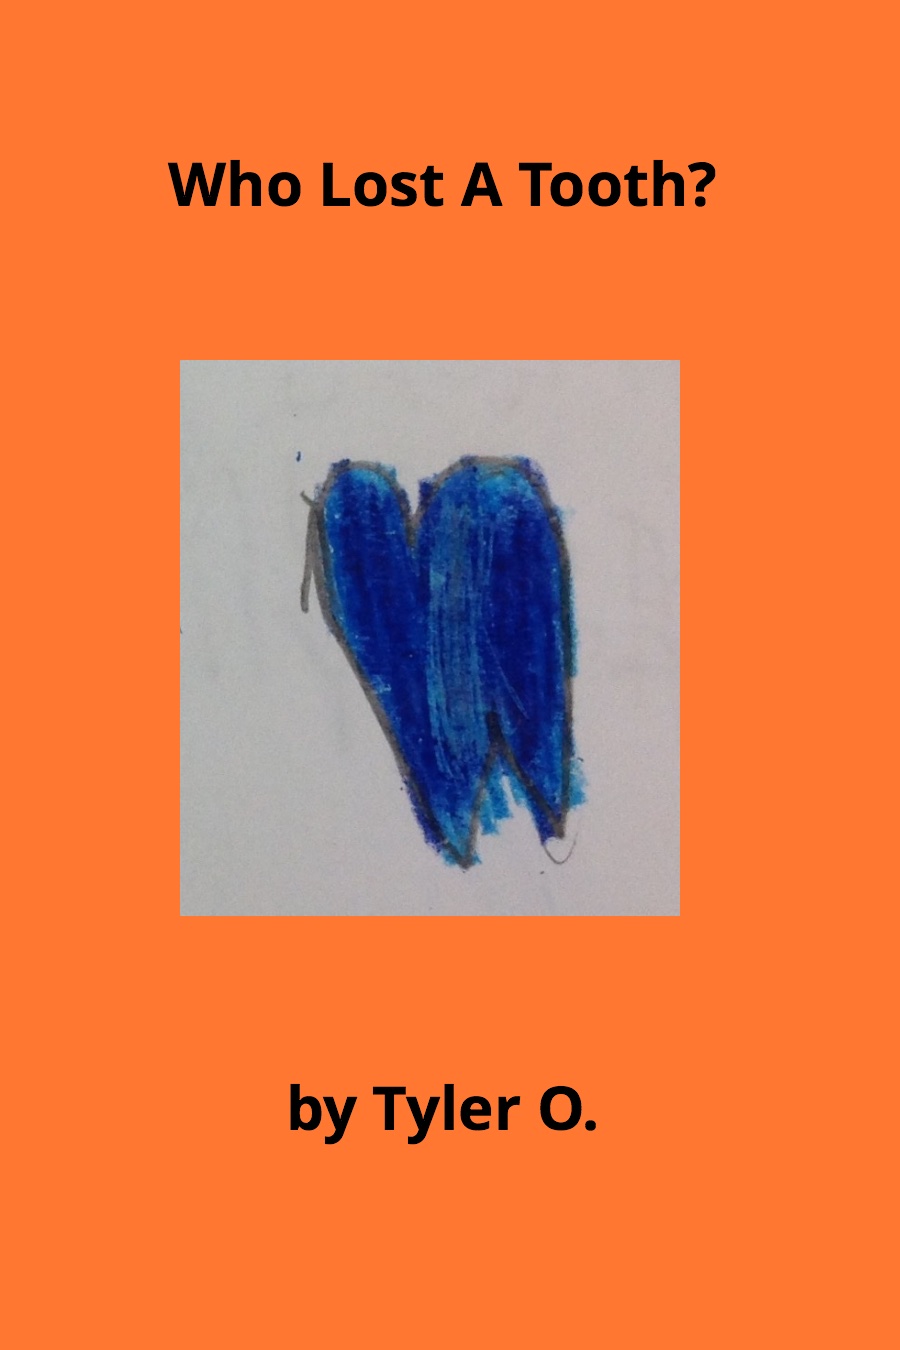 Who Lost a Tooth by Tyler O